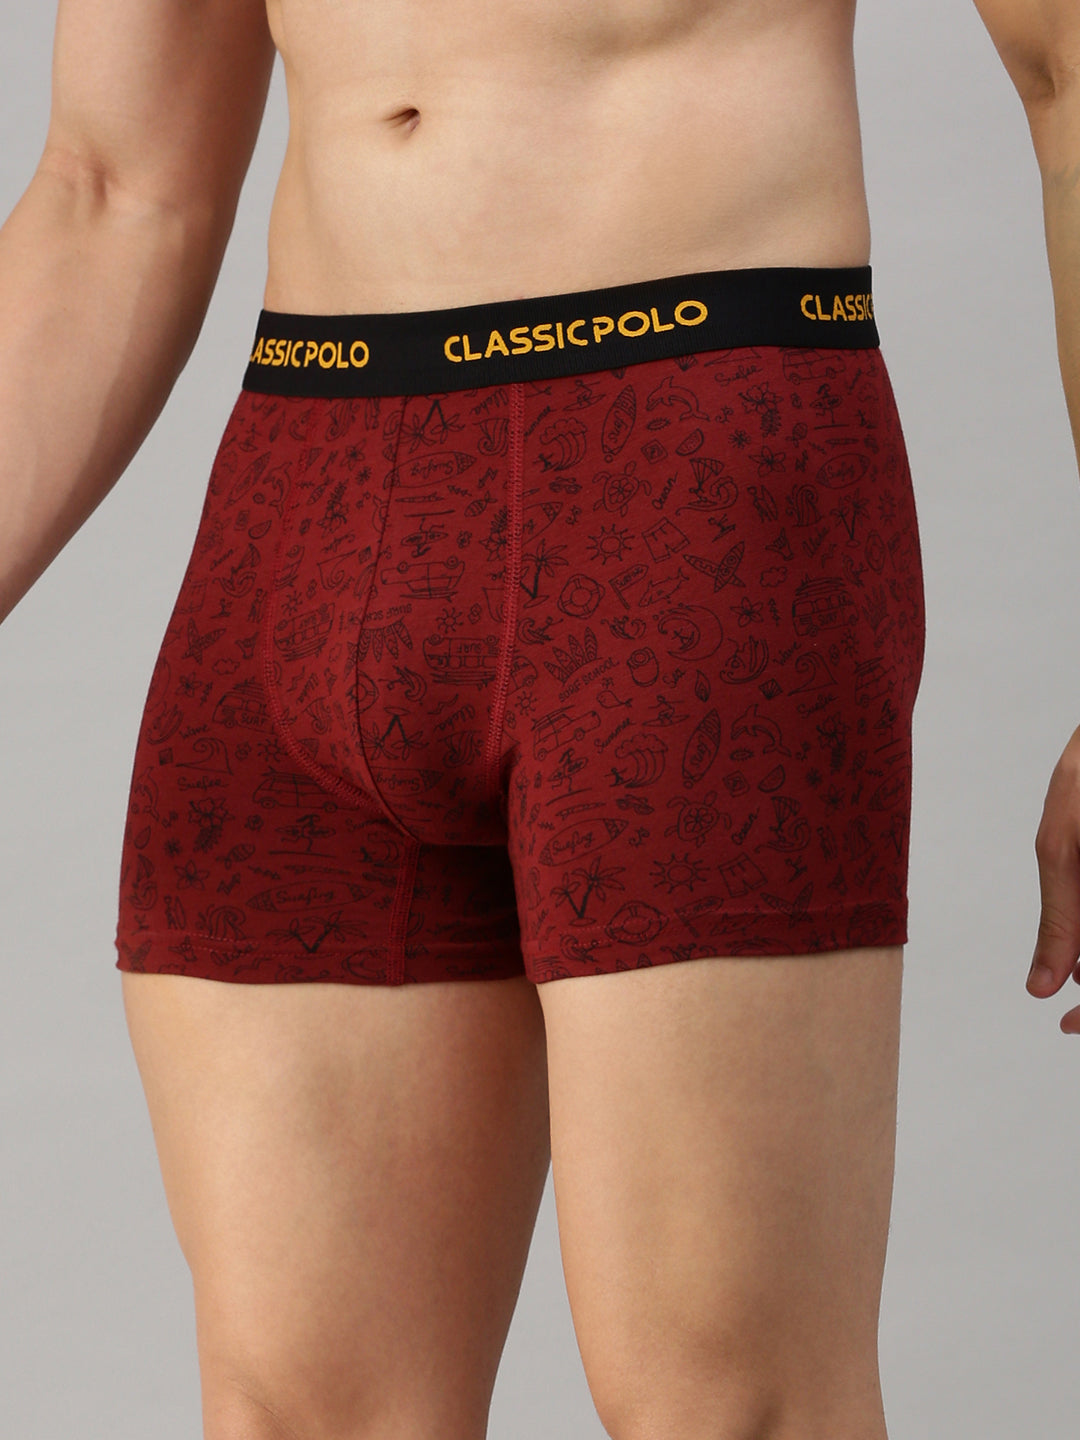 Classic Polo Men's Modal Printed Trunks | Glance - Blue & Red (Pack of 2)